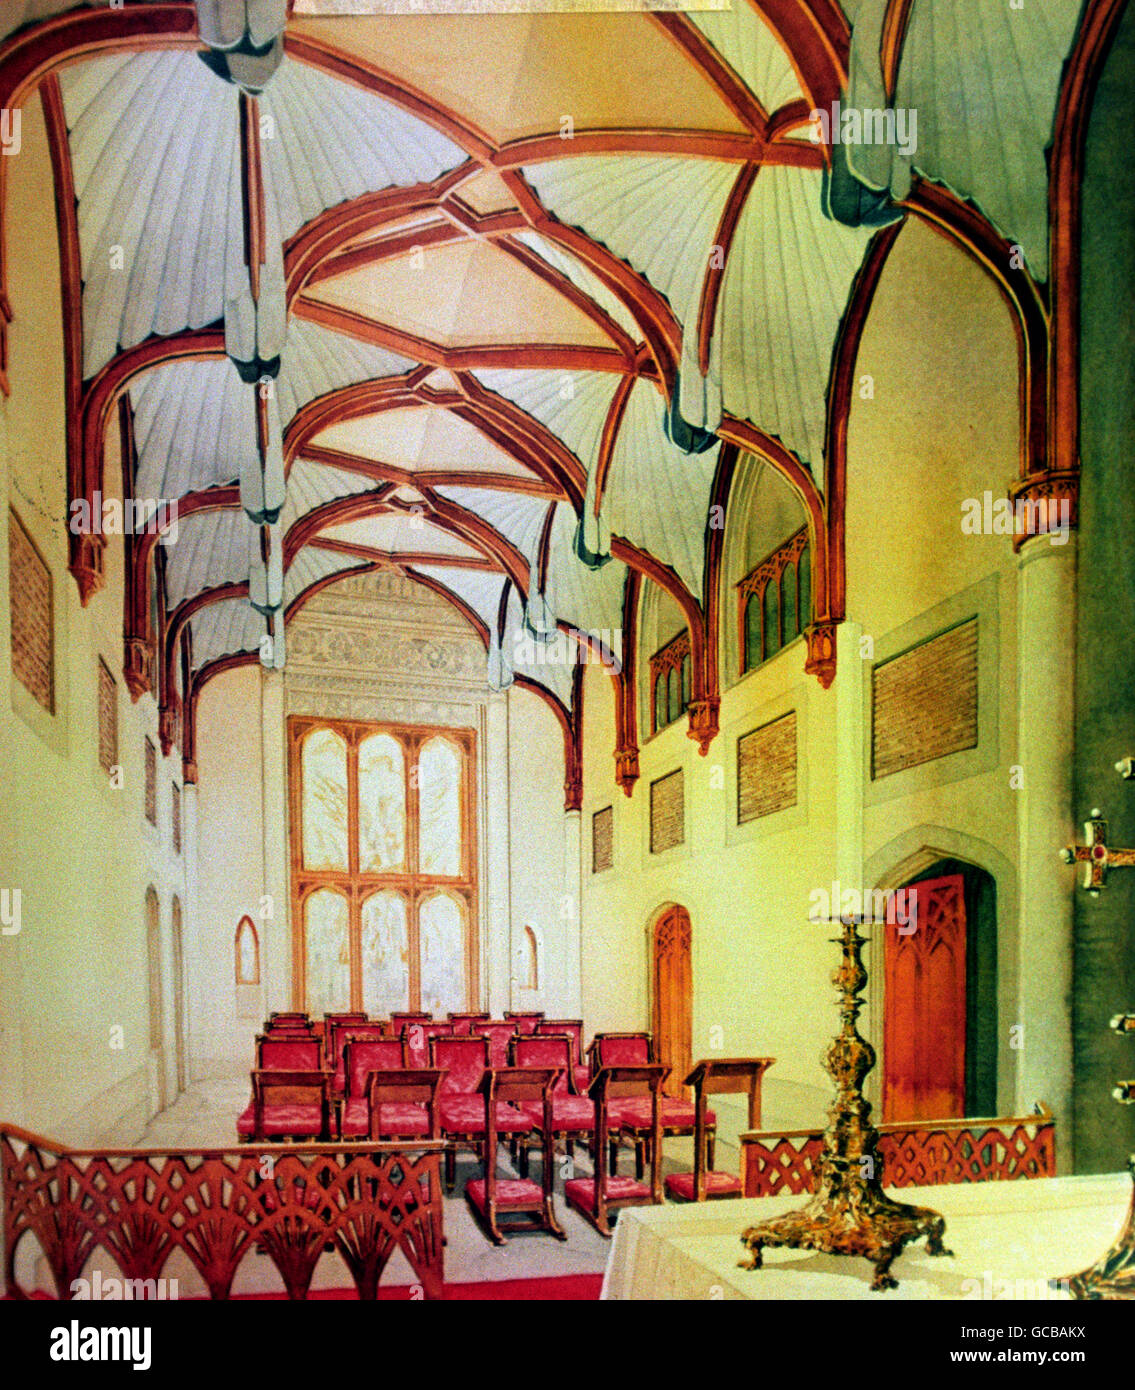 Artist's impression of the restored Private Chapel at Windsor Castle, where restoration is being carried out after fire damage. Stock Photo